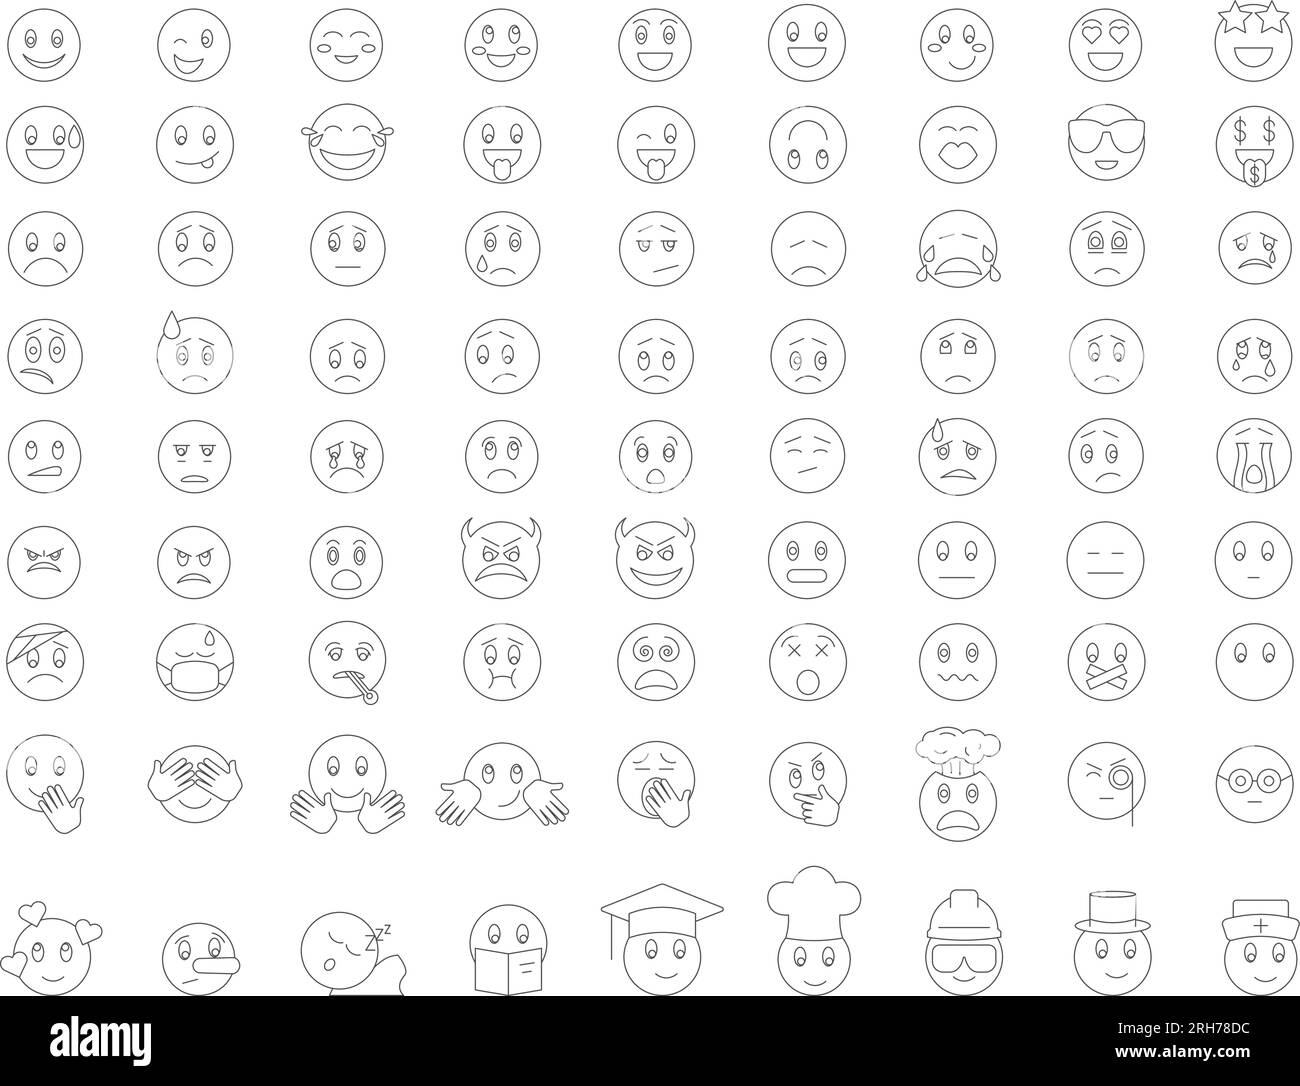 Emoji Reactions Icons Set. Emoticons, Facial Expressions. Editable Stroke. Simple Icons Vector Collection Stock Vector